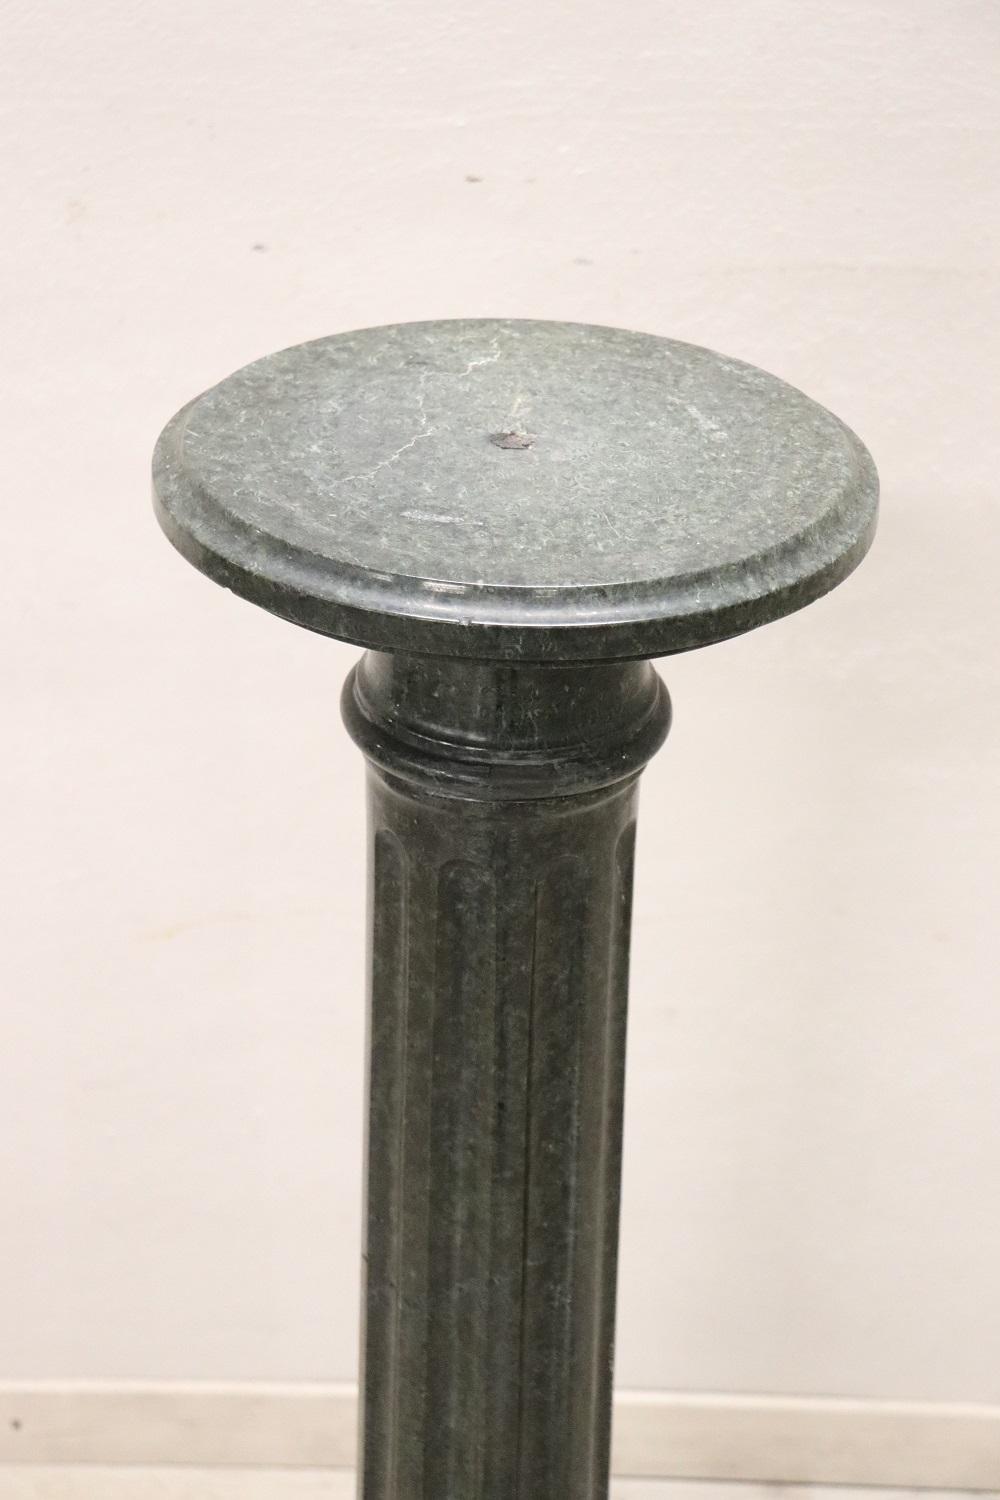 This spectacular late 19th century antique column in made of precious green Italian marble from the Alps. The body is sculpted with grooves. Its dimensions allow you to exhibit sculptures or even large vases such as busts. Very small defects in the